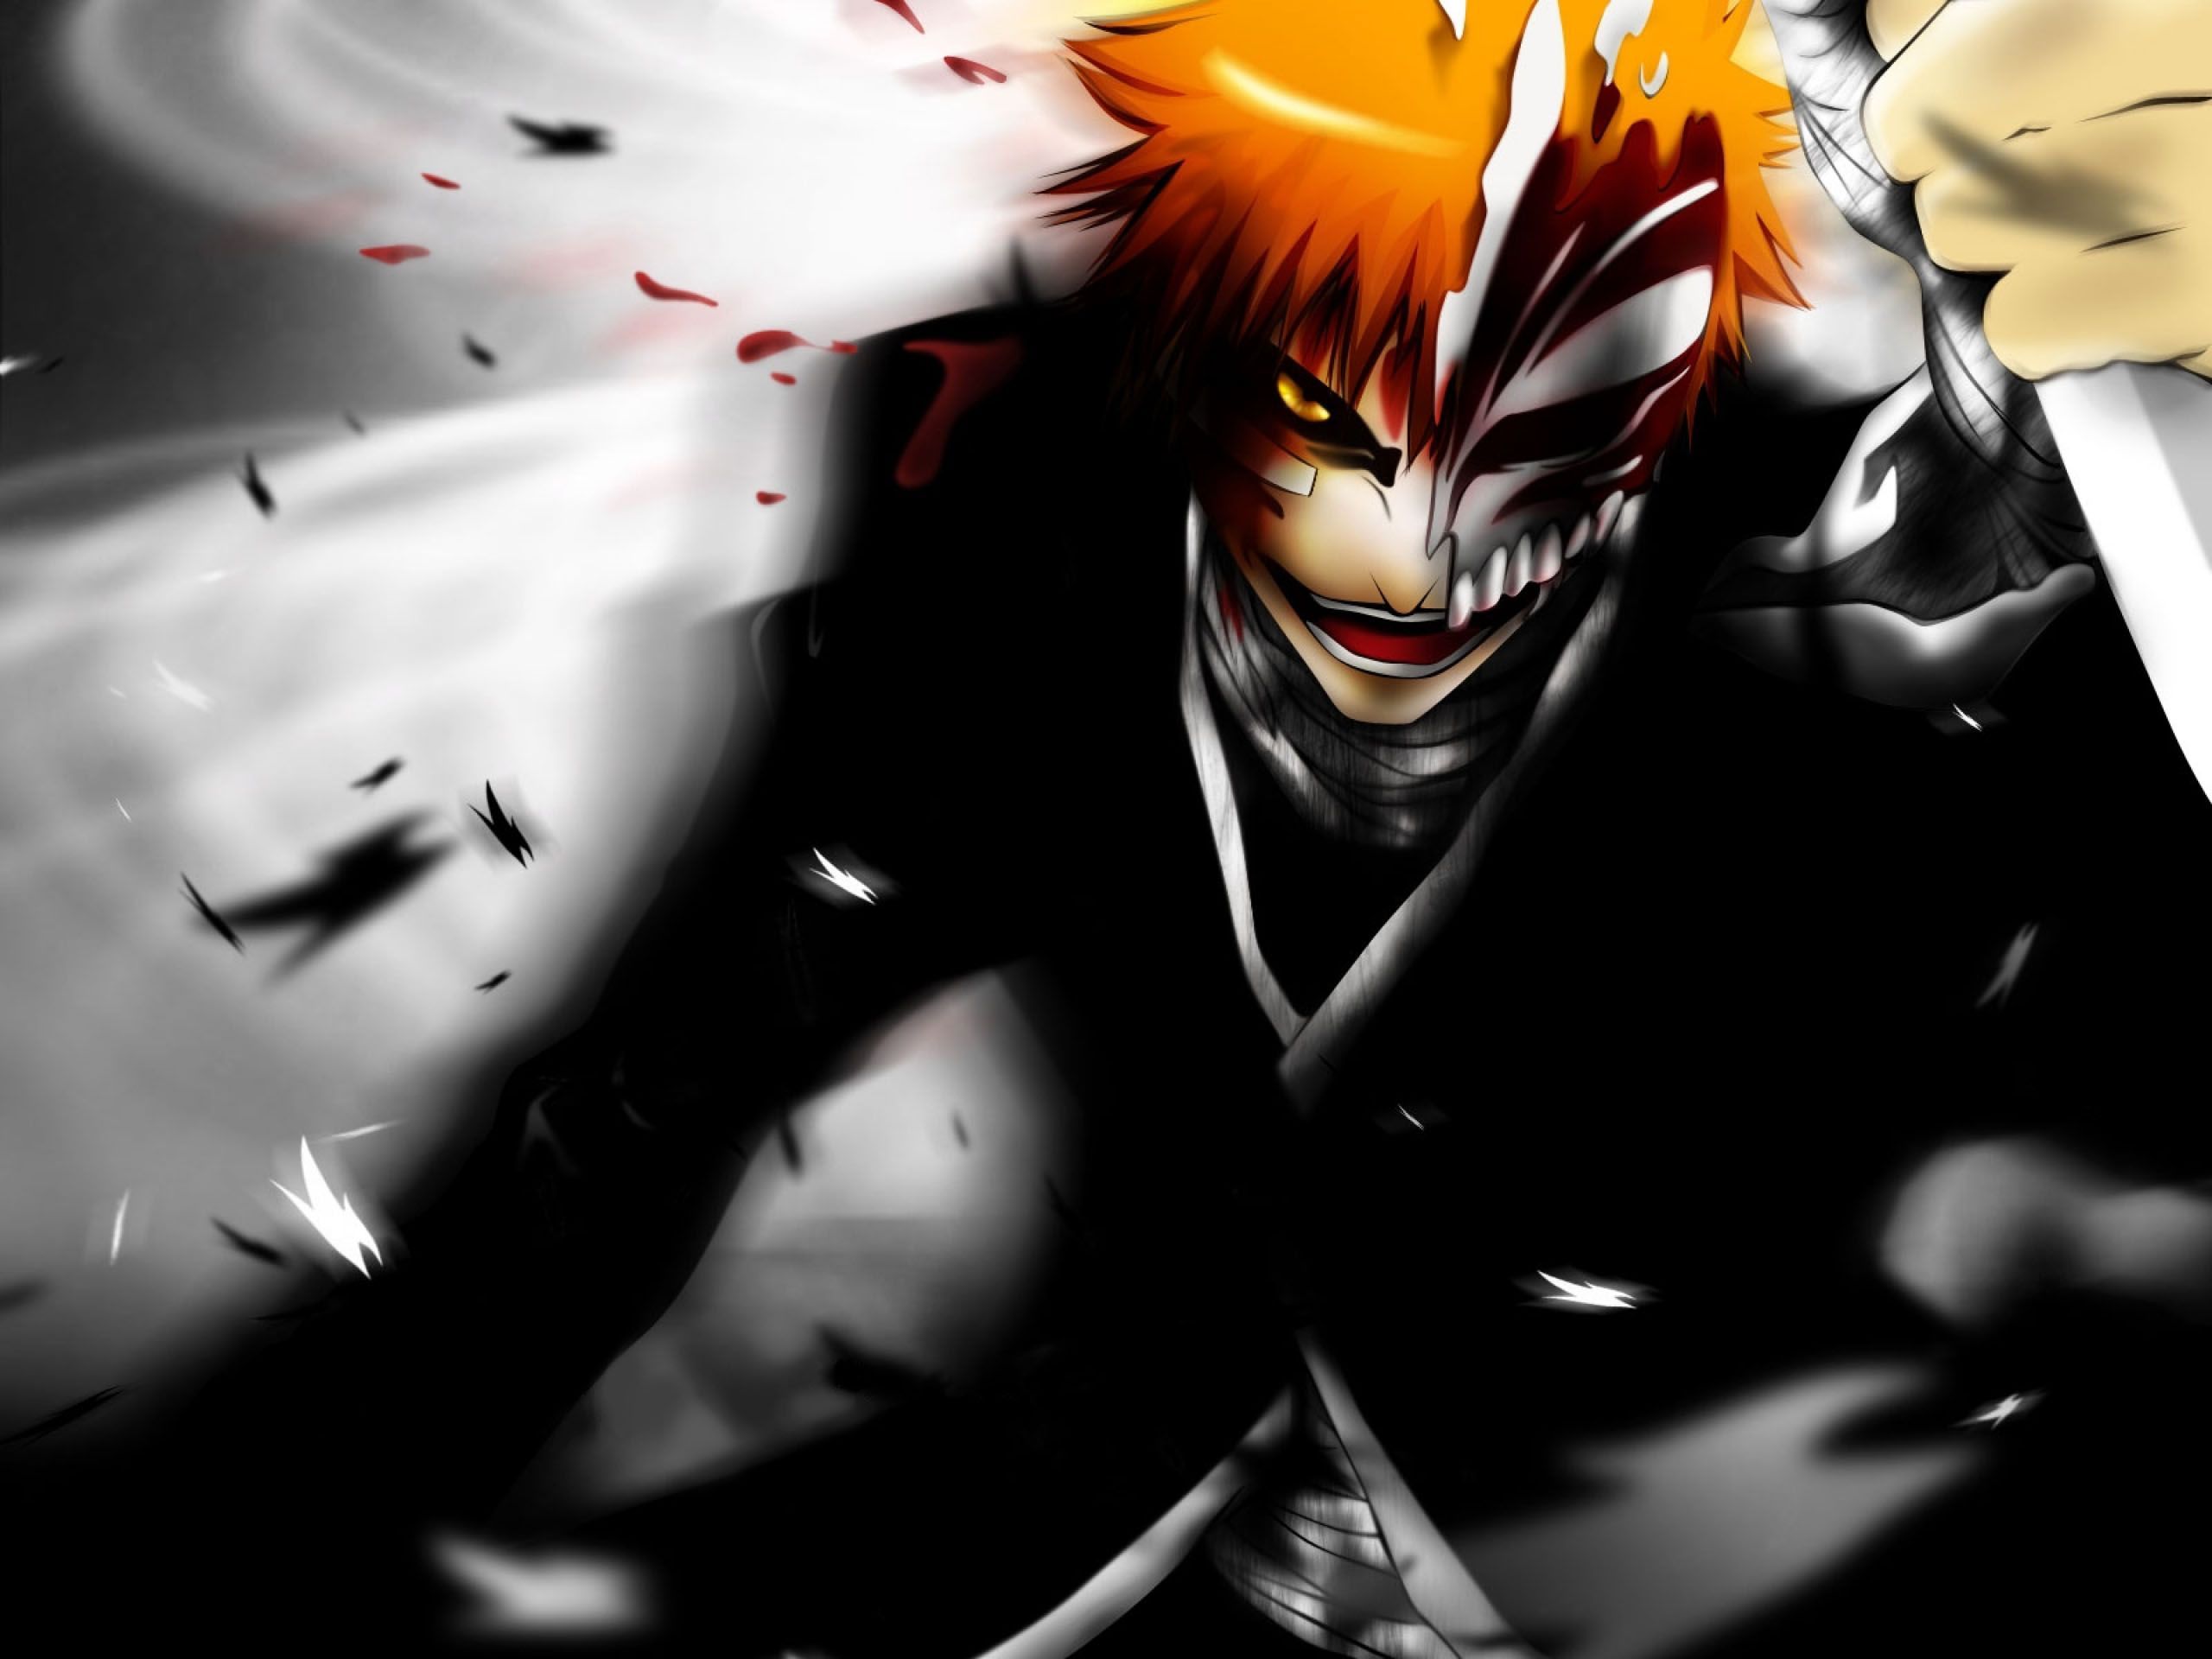 Ichigo with Hollow Mask in Action - 2560x1920 - Wallpaper #2406 on ...